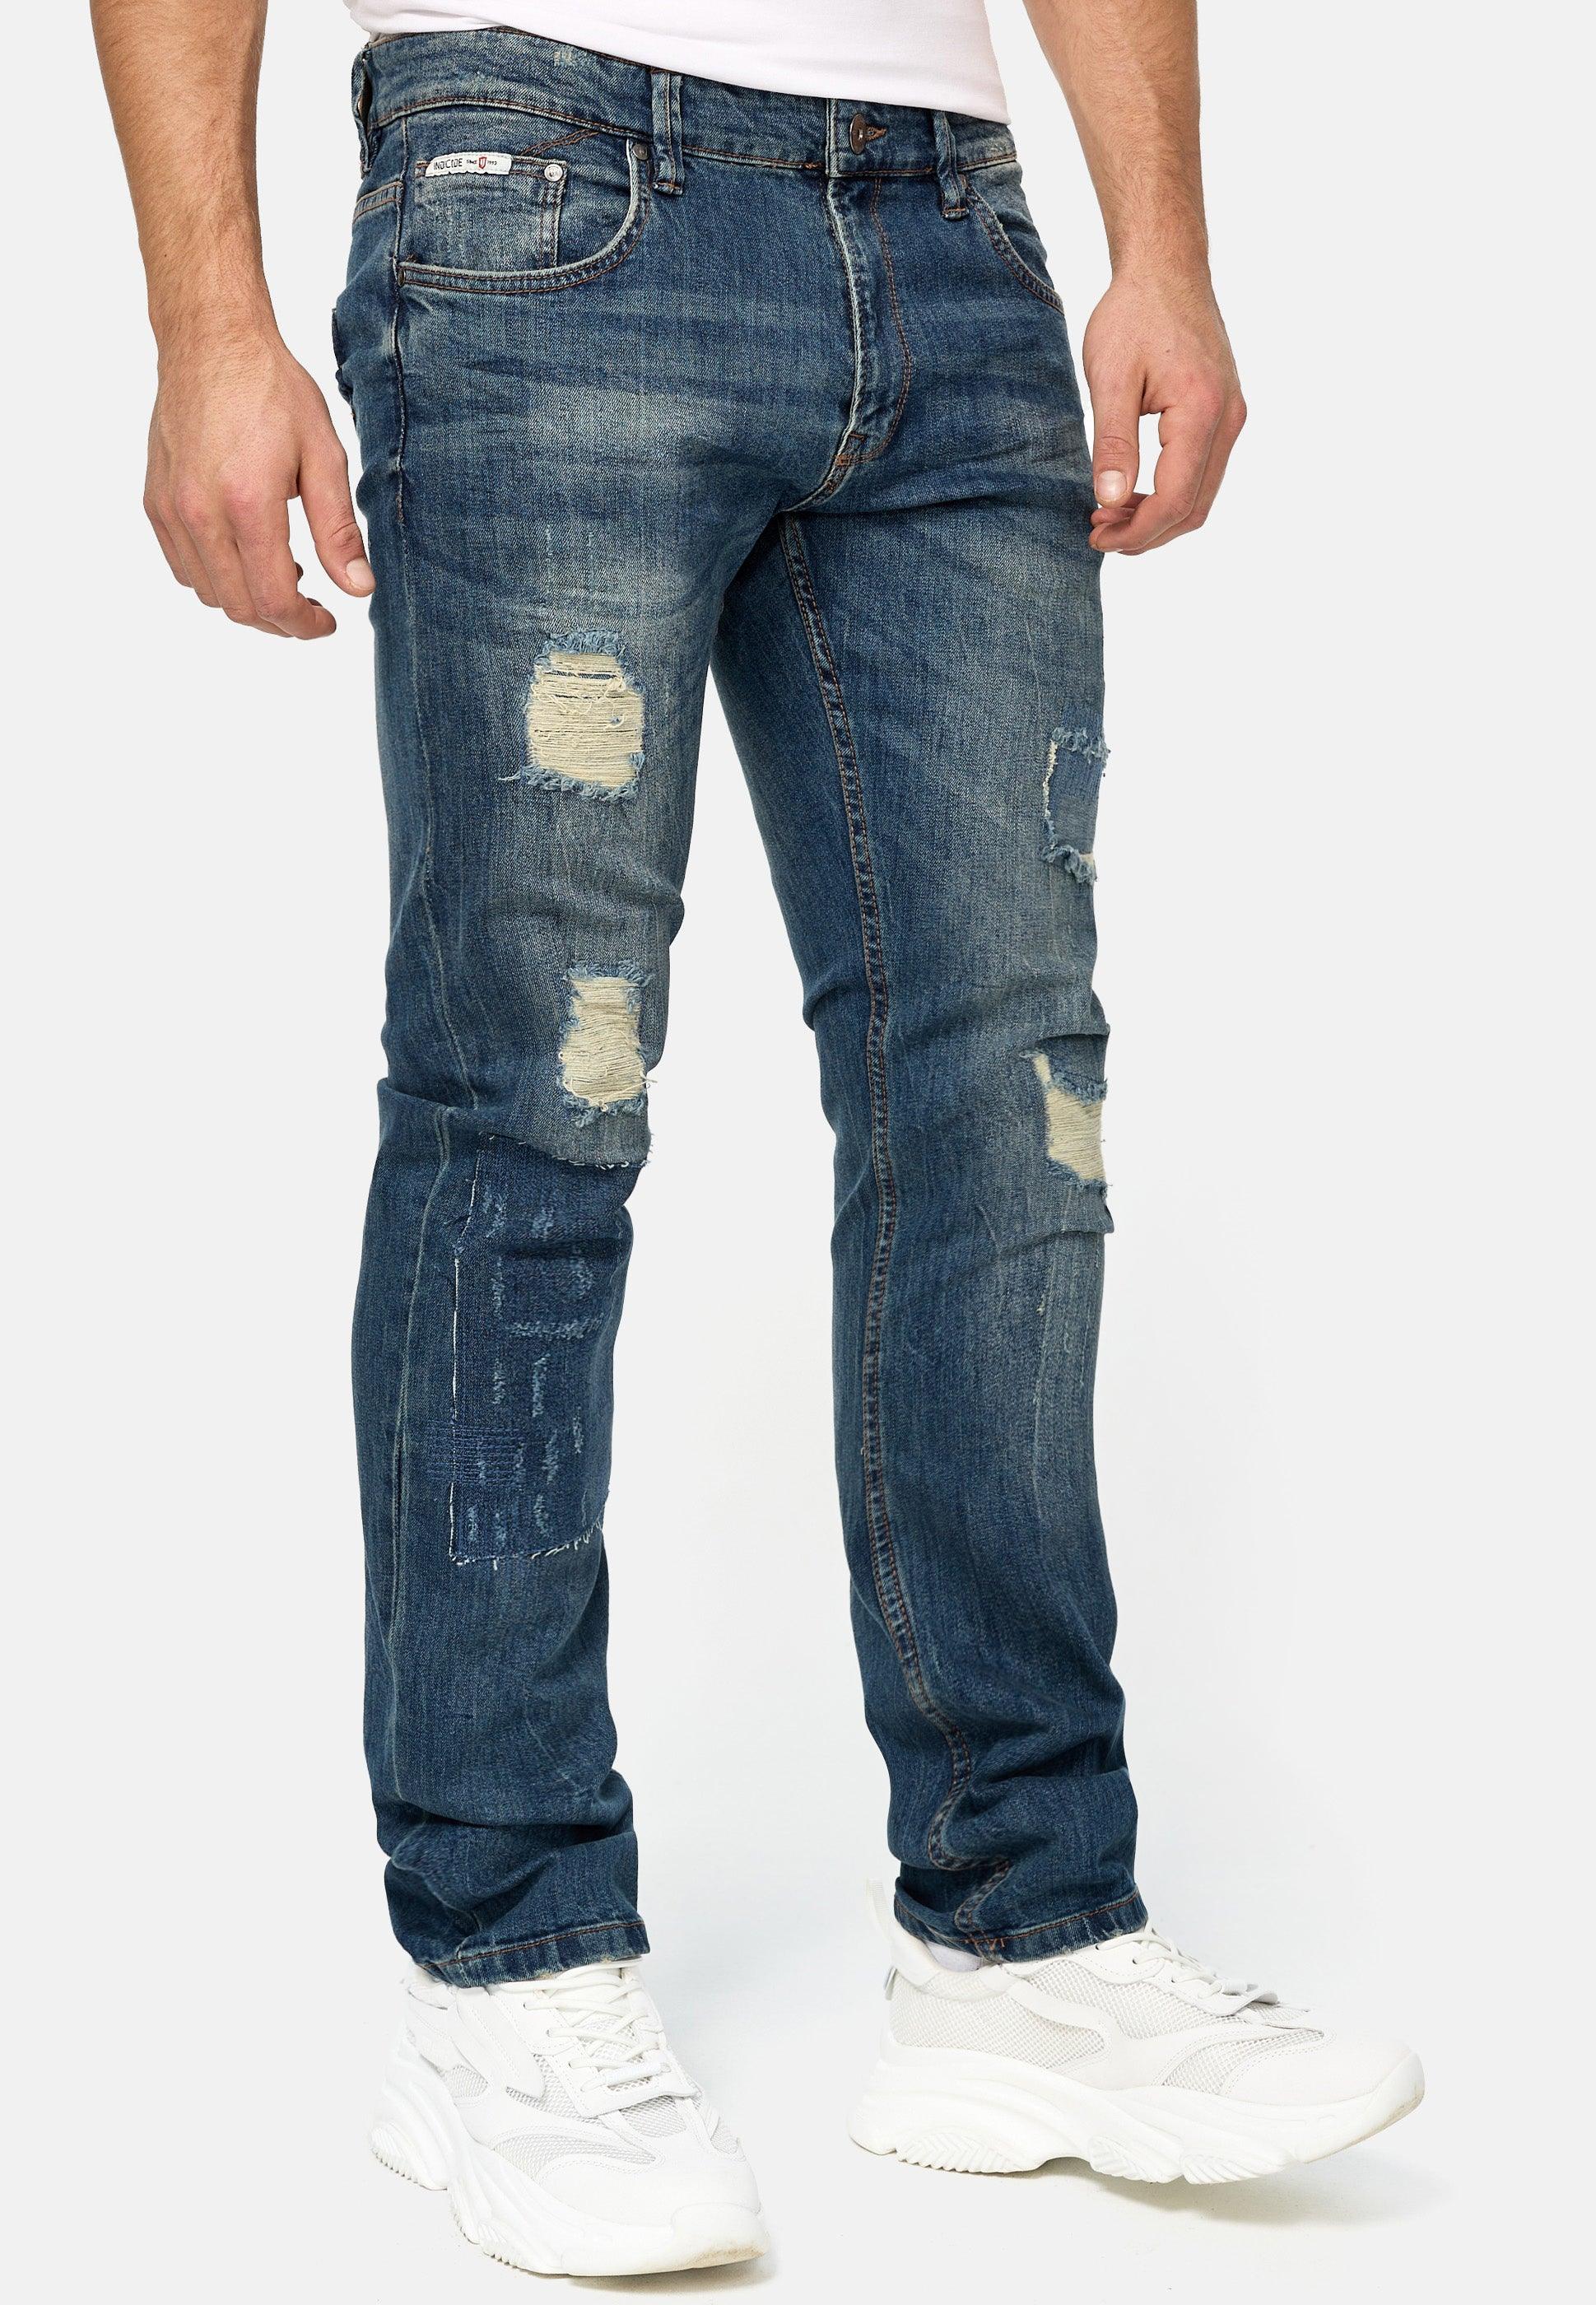 MY FAVORITE DENIM FROM COS | Gallery posted by Kristine | Lemon8